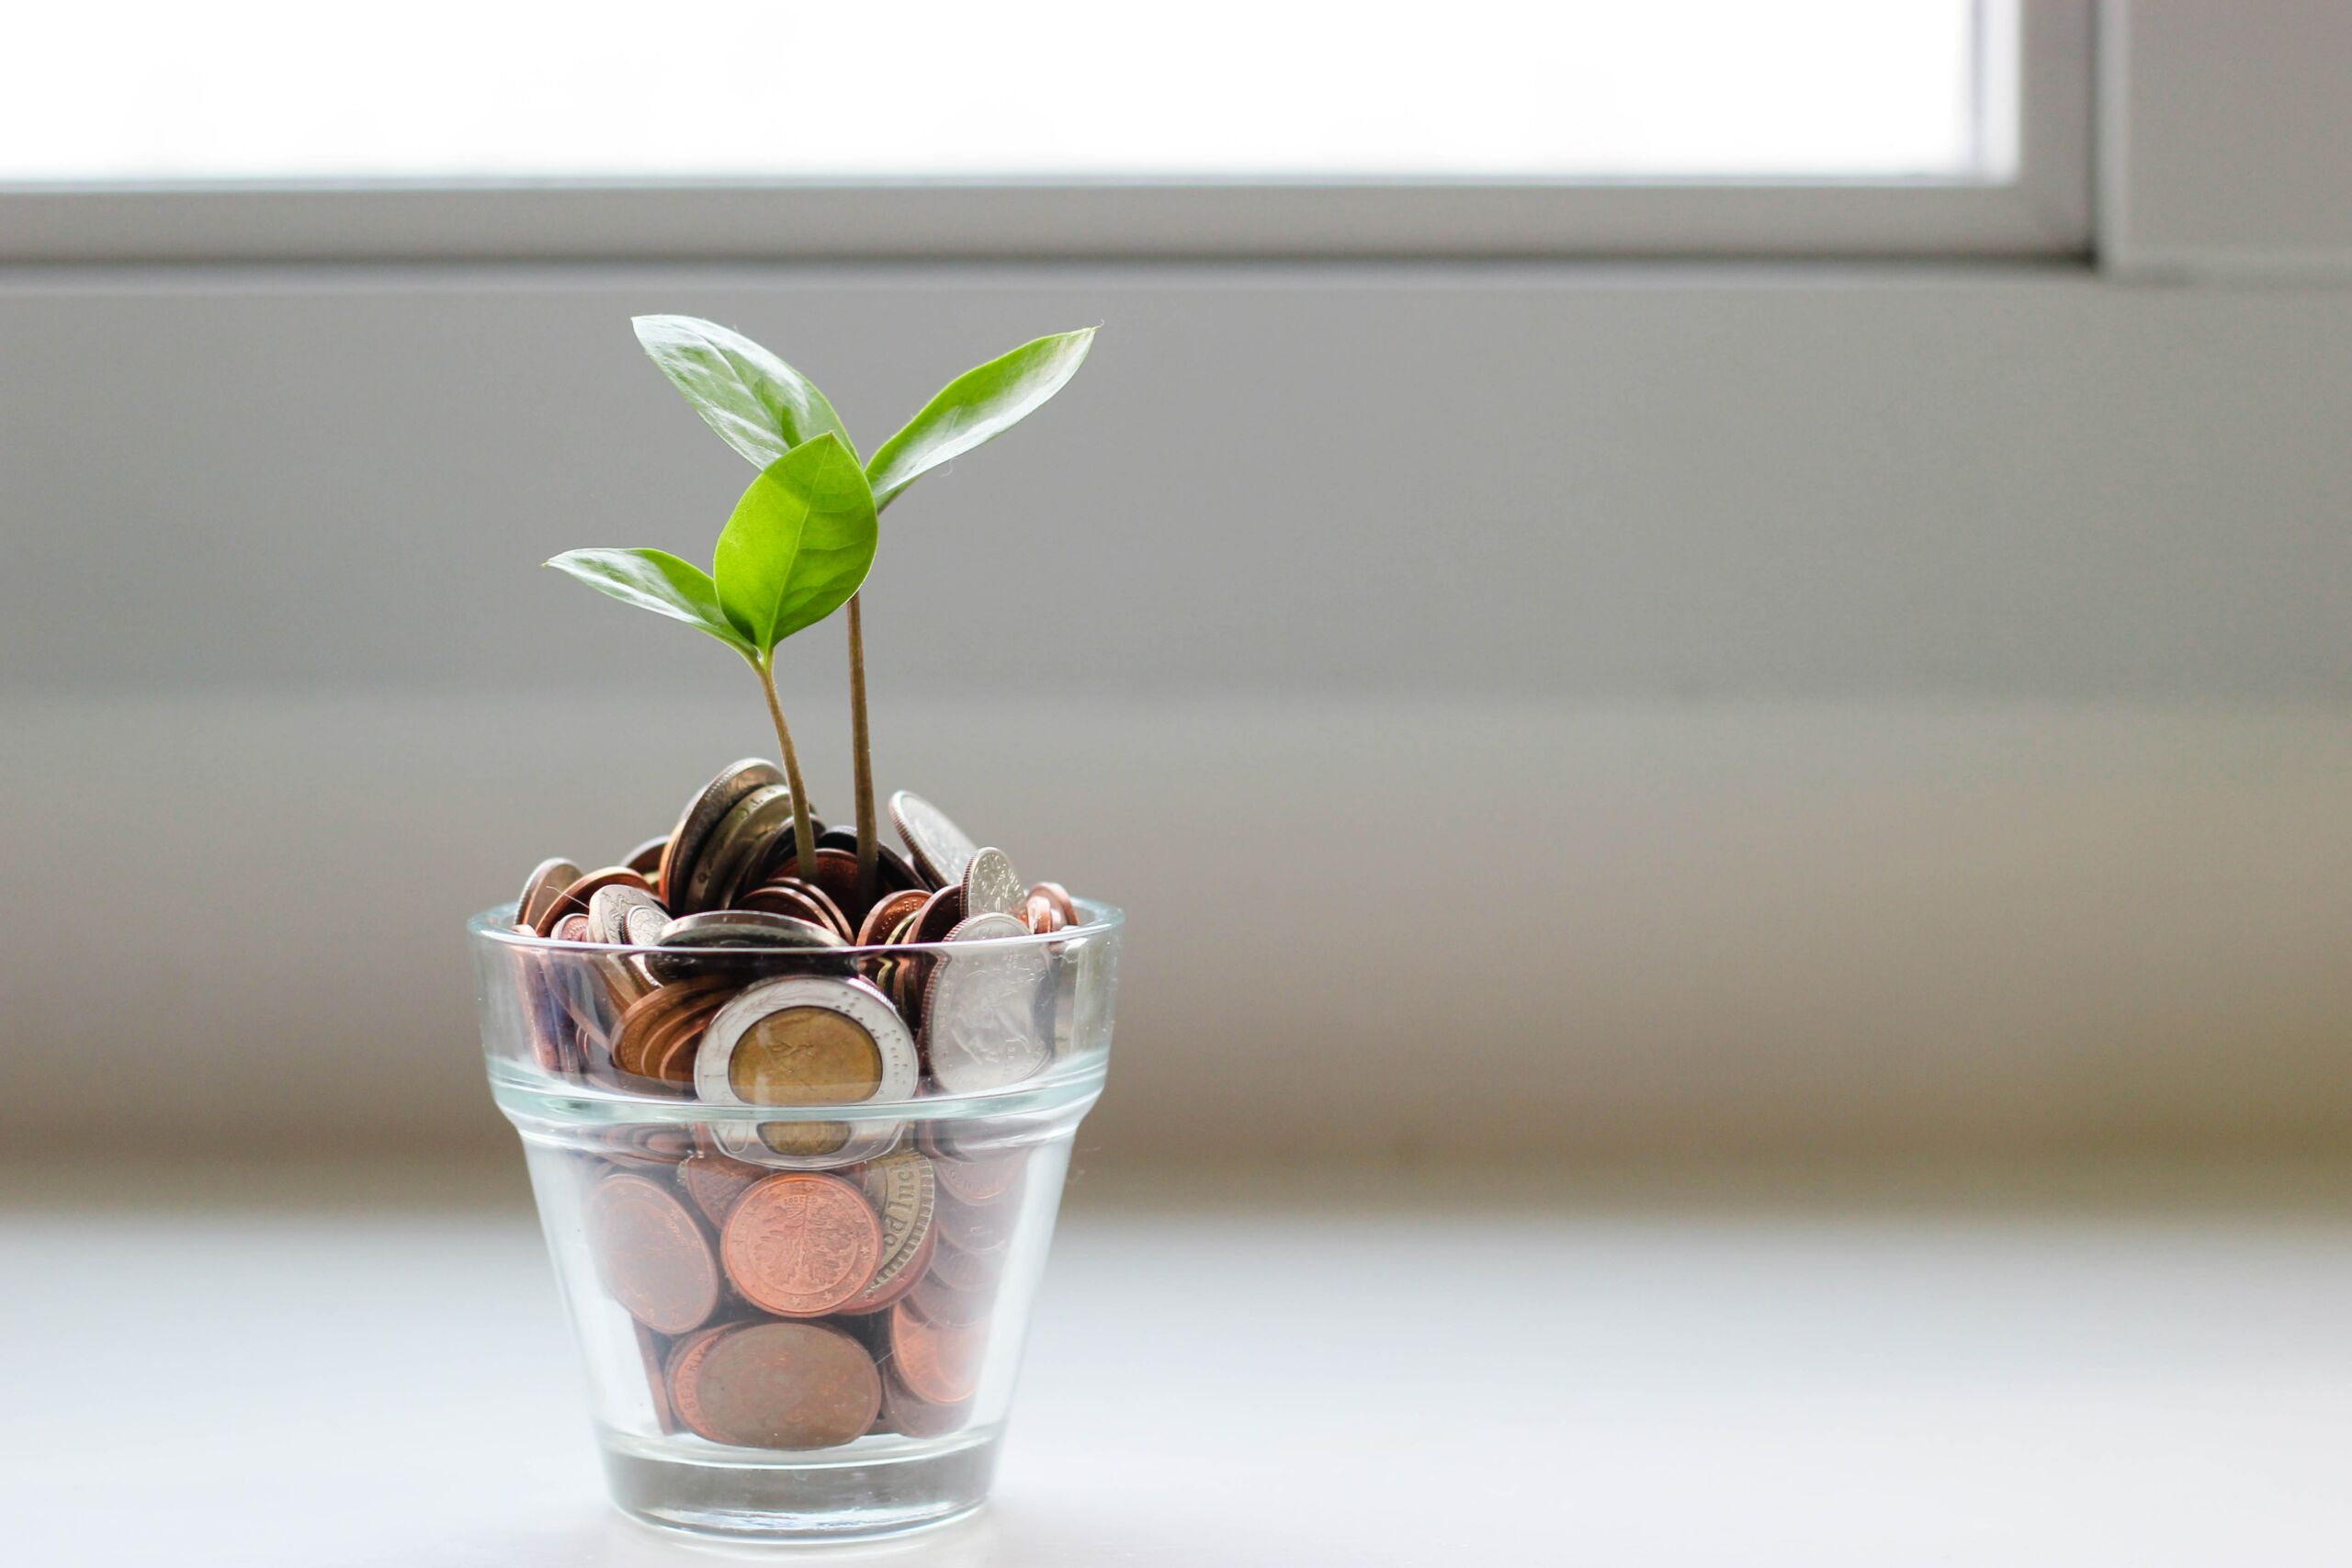 A plant growing out of a pot full of coins